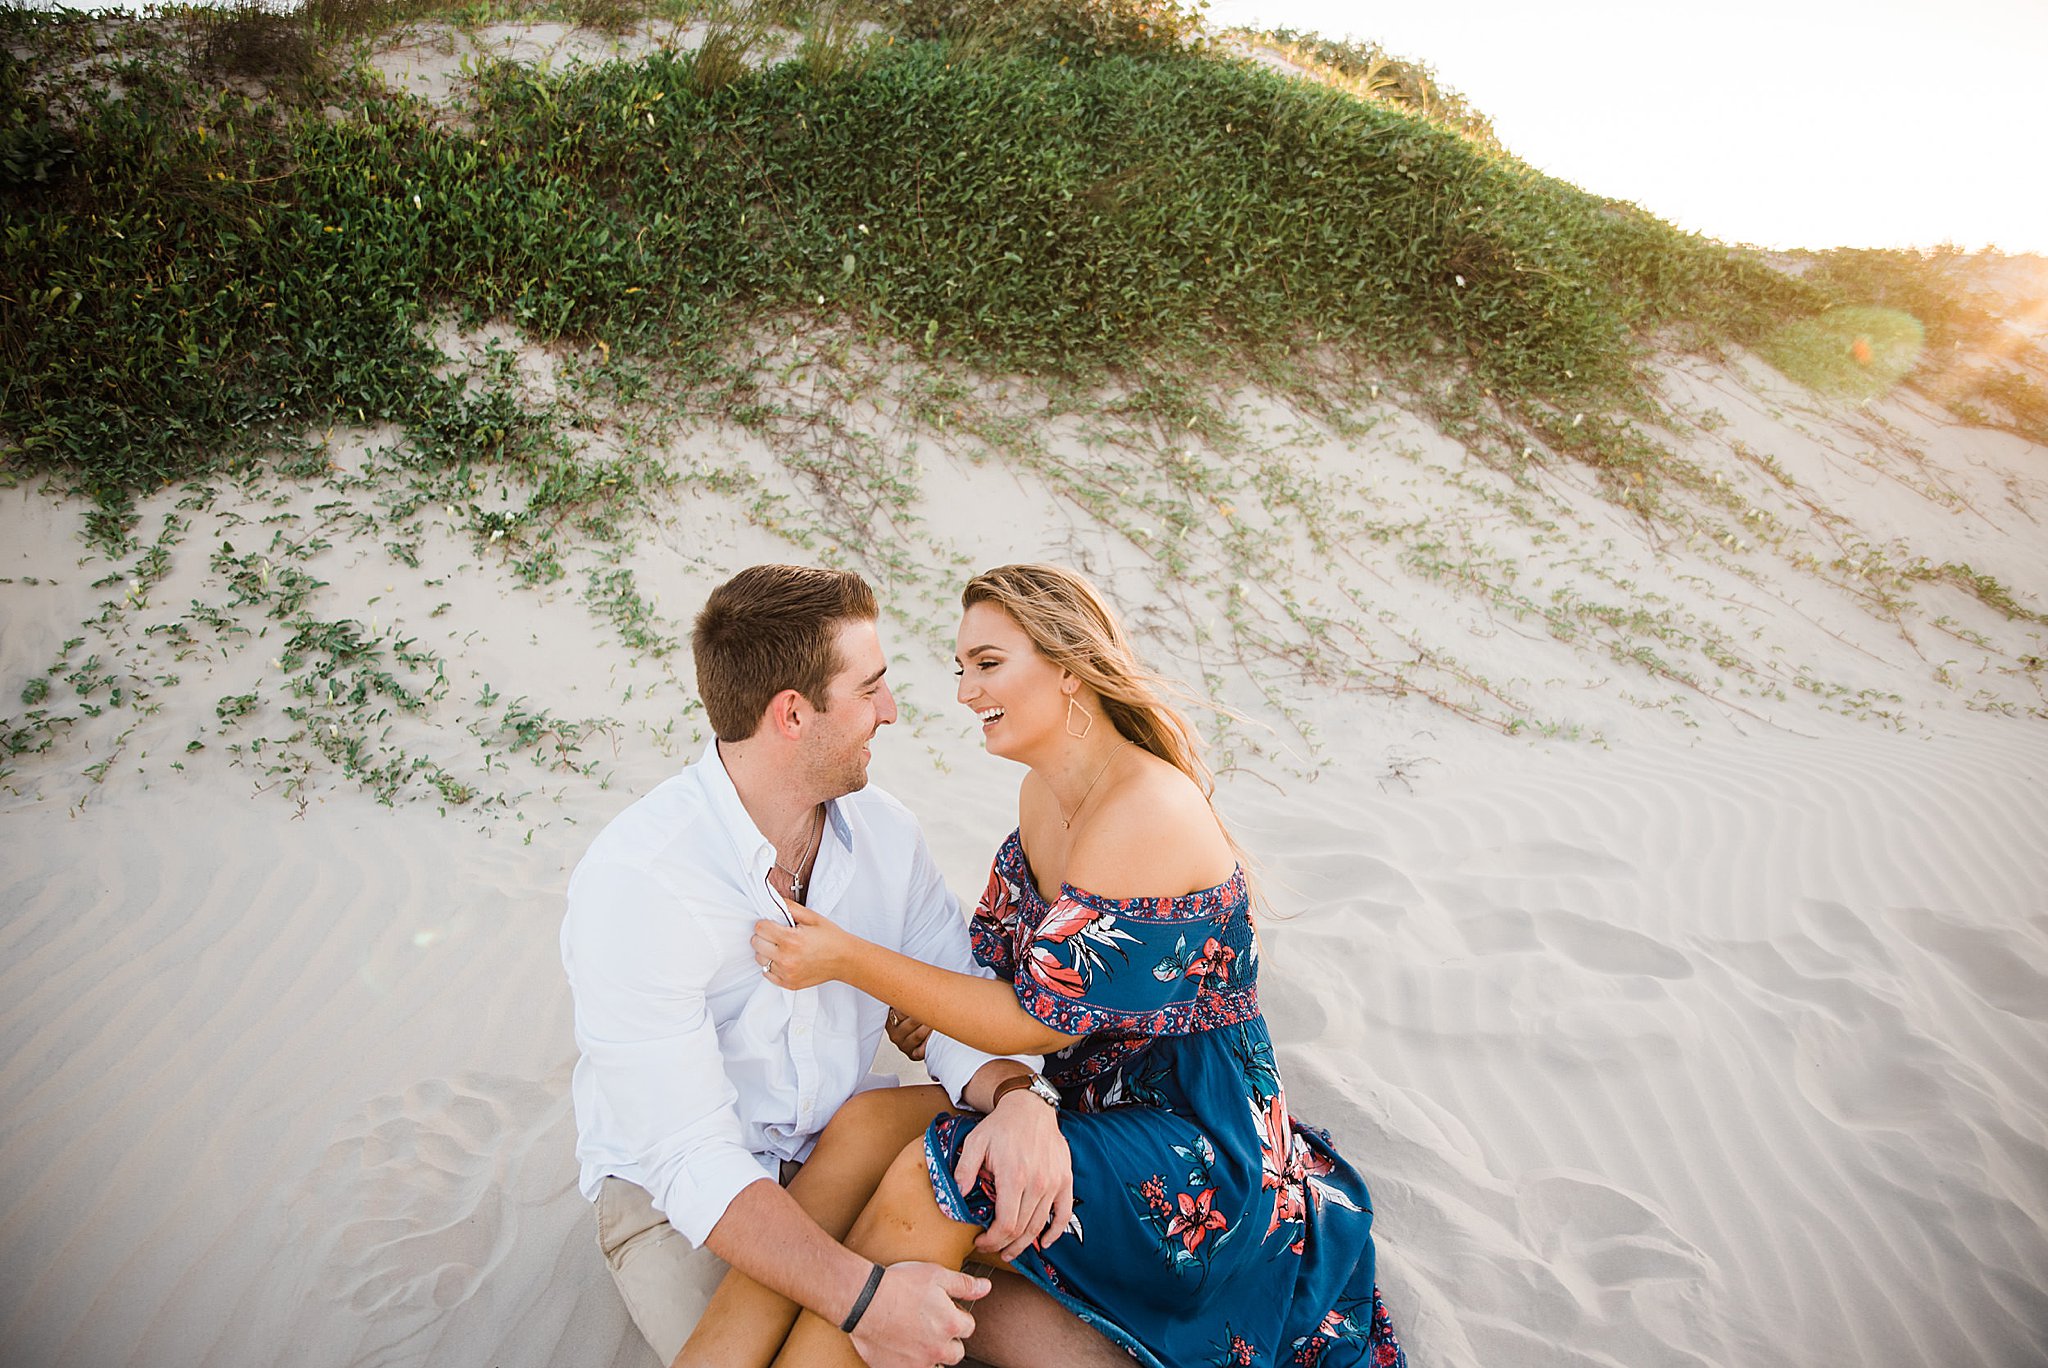 Man in white shirt and khaki short with woman in blue floral dress seated on the beach with greenery in background during north padre island engagement